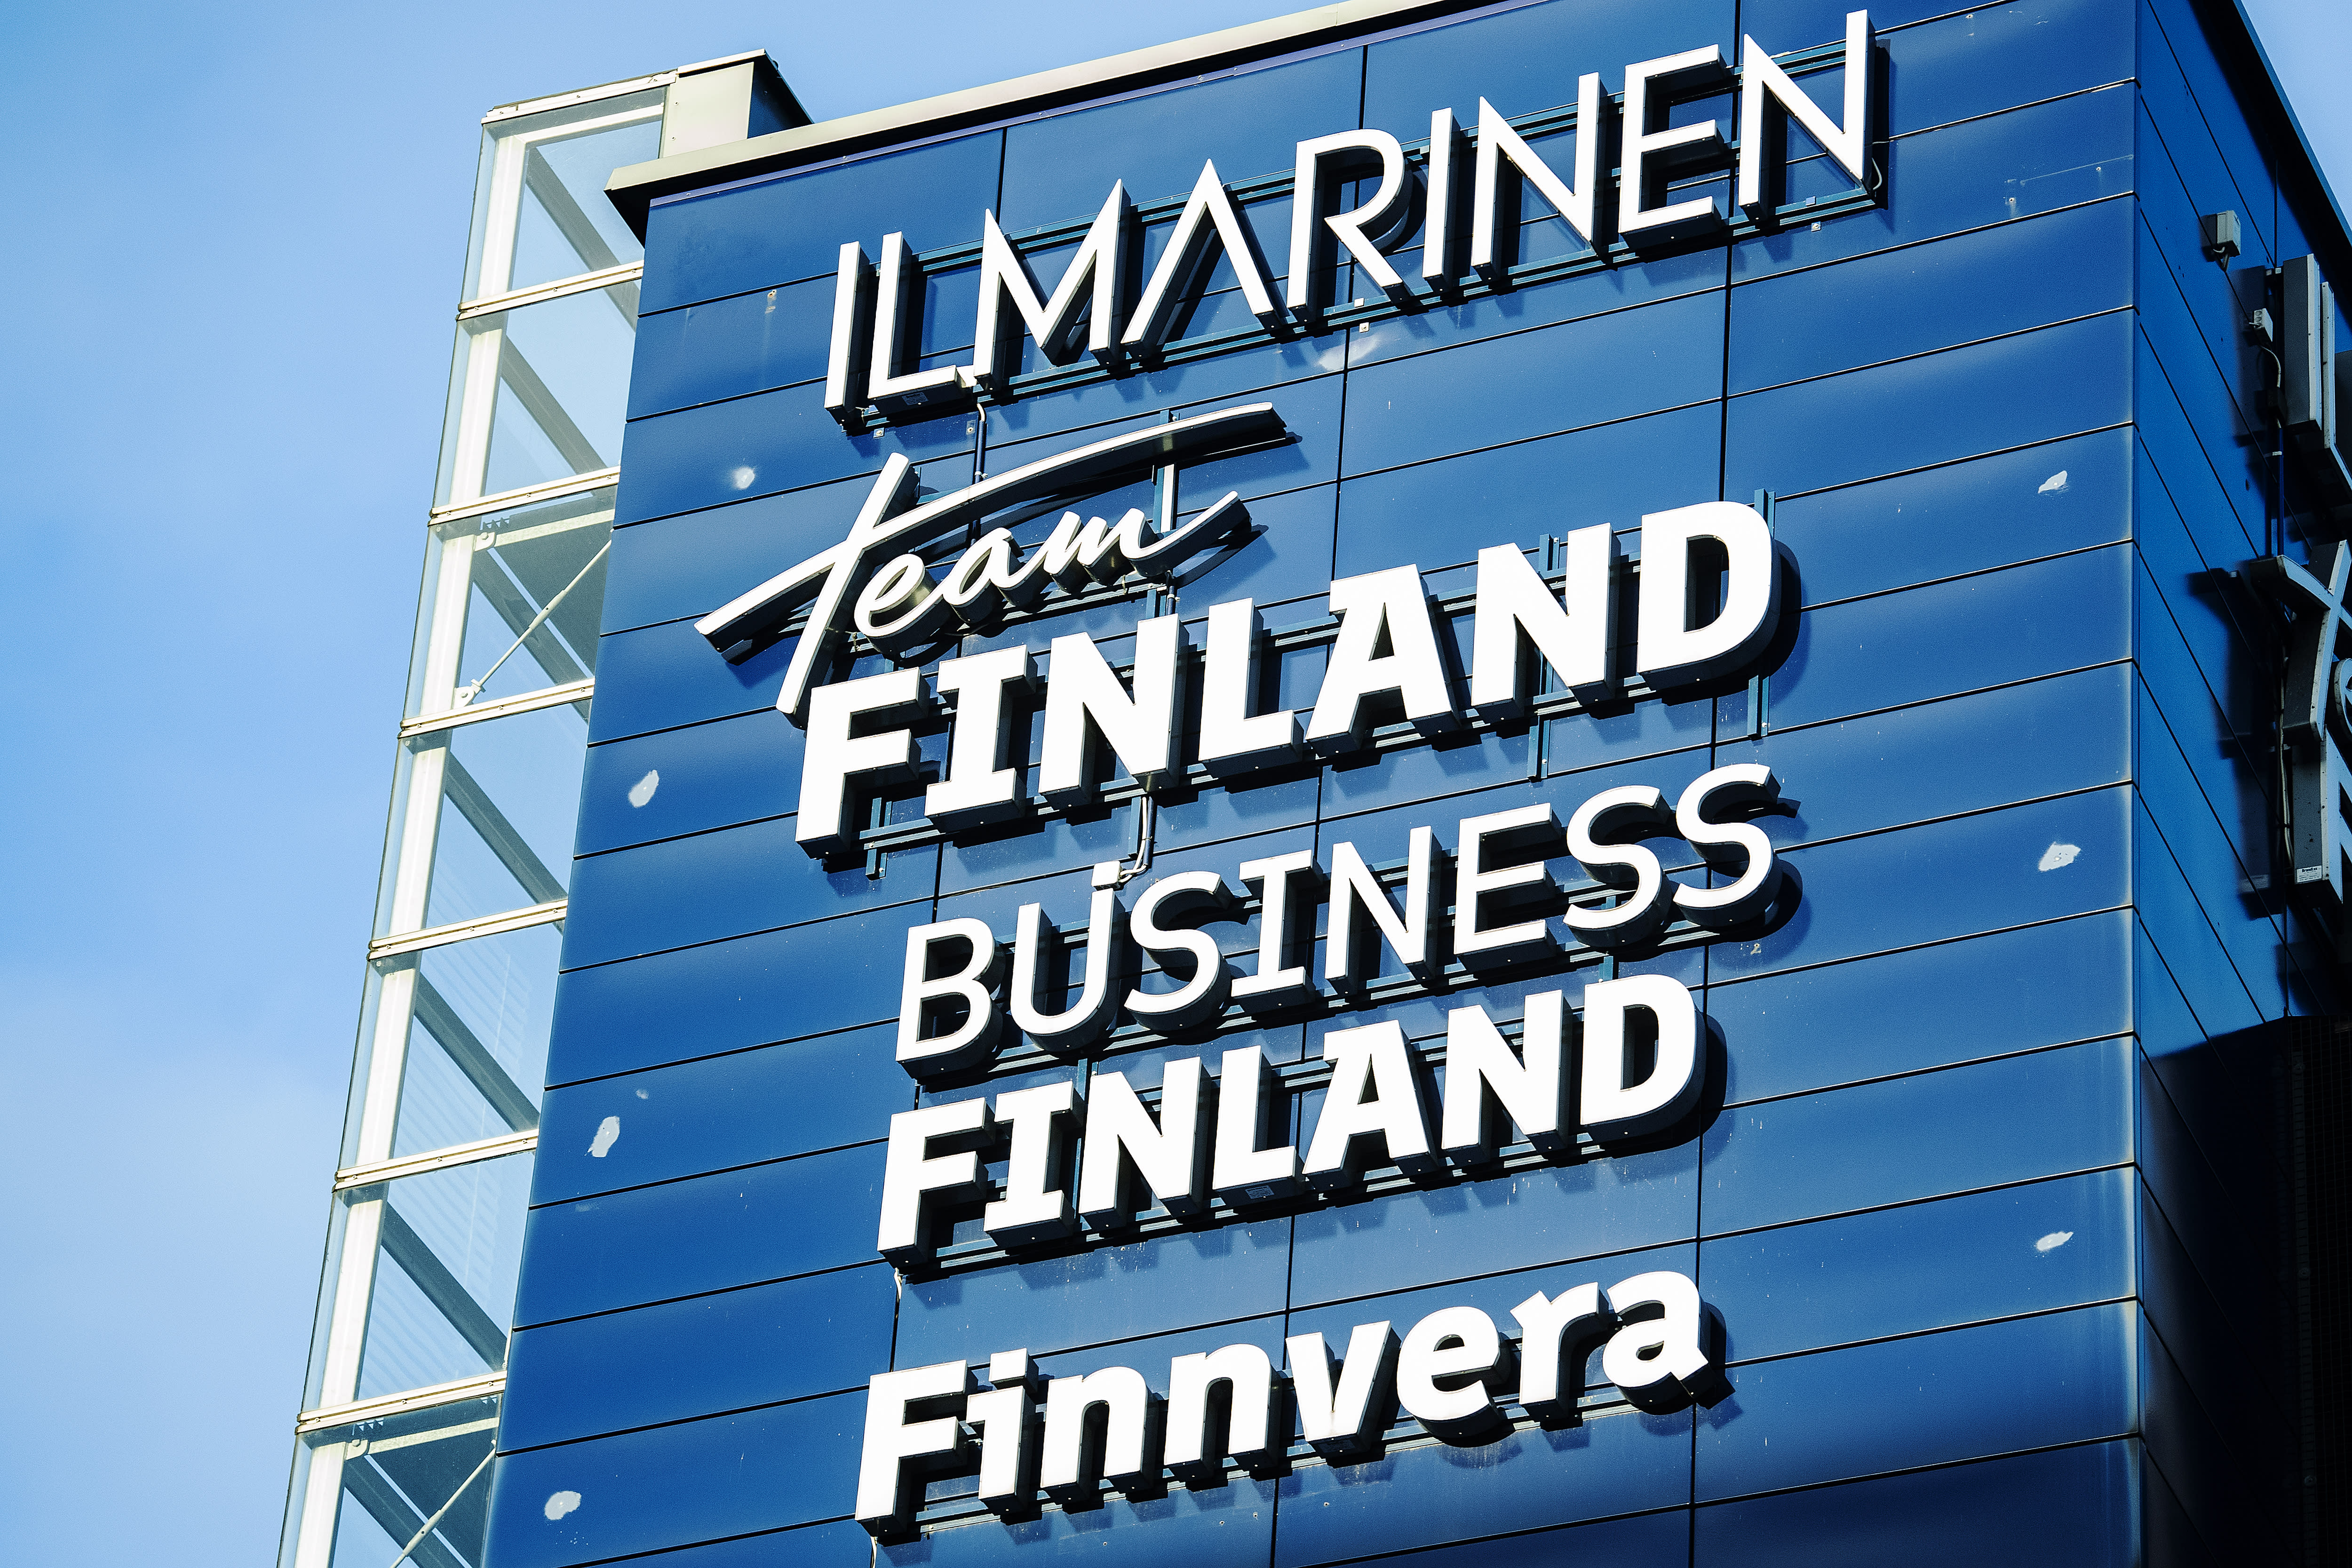 The NBI is investigating a former employee of Business Finland who is suspected of embezzlement